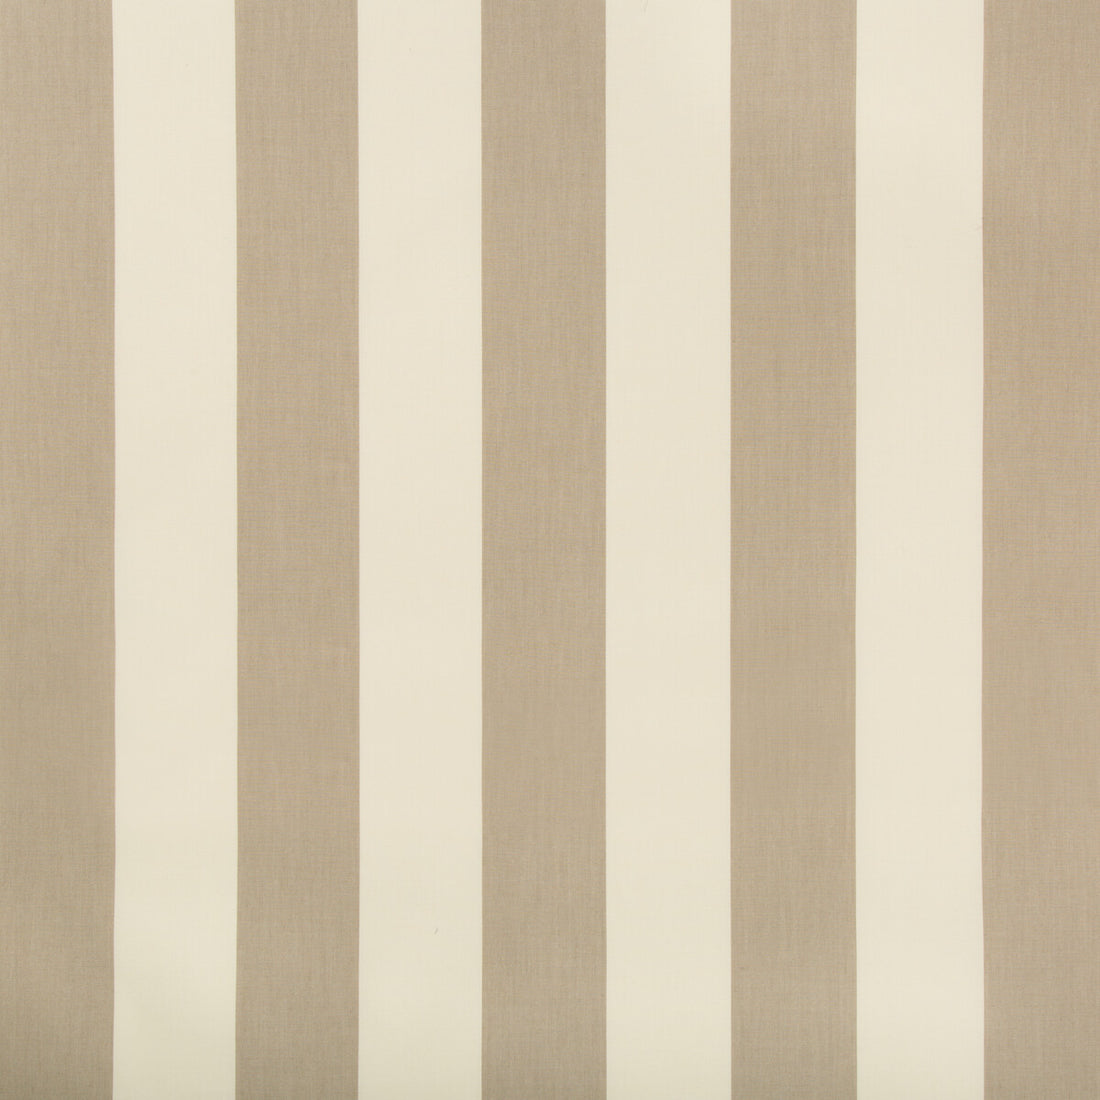 Kravet Basics fabric in 35373-106 color - pattern 35373.106.0 - by Kravet Basics in the Performance Indoor Outdoor collection